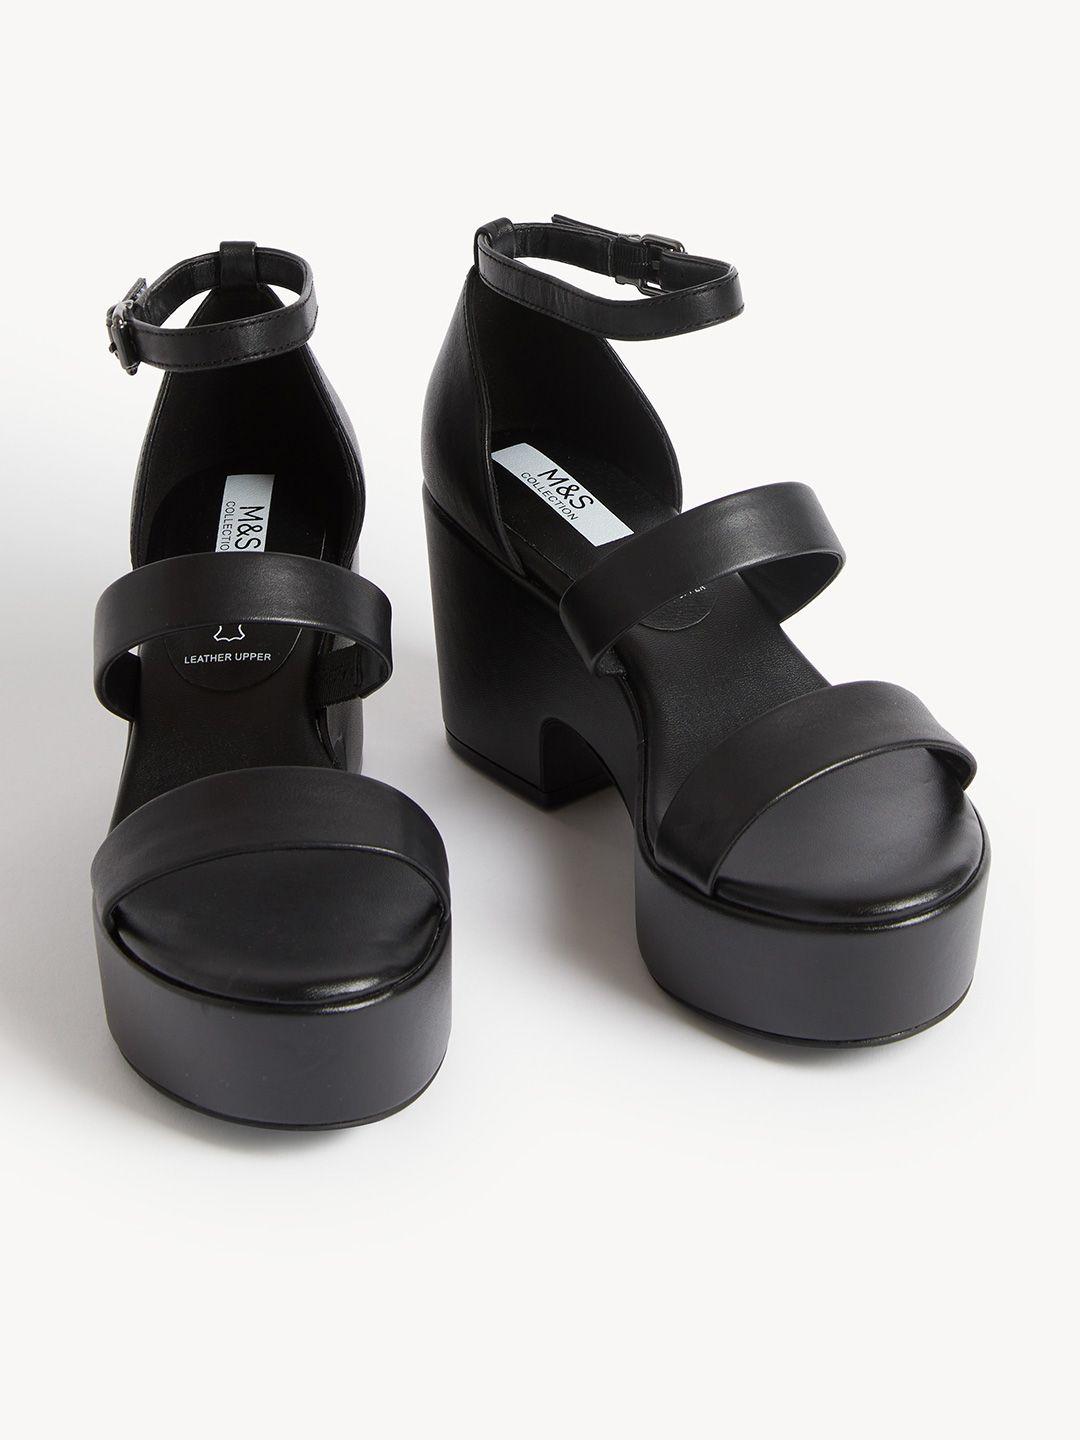 marks-&-spencer-open-toe-leather-block-heels-with-buckles